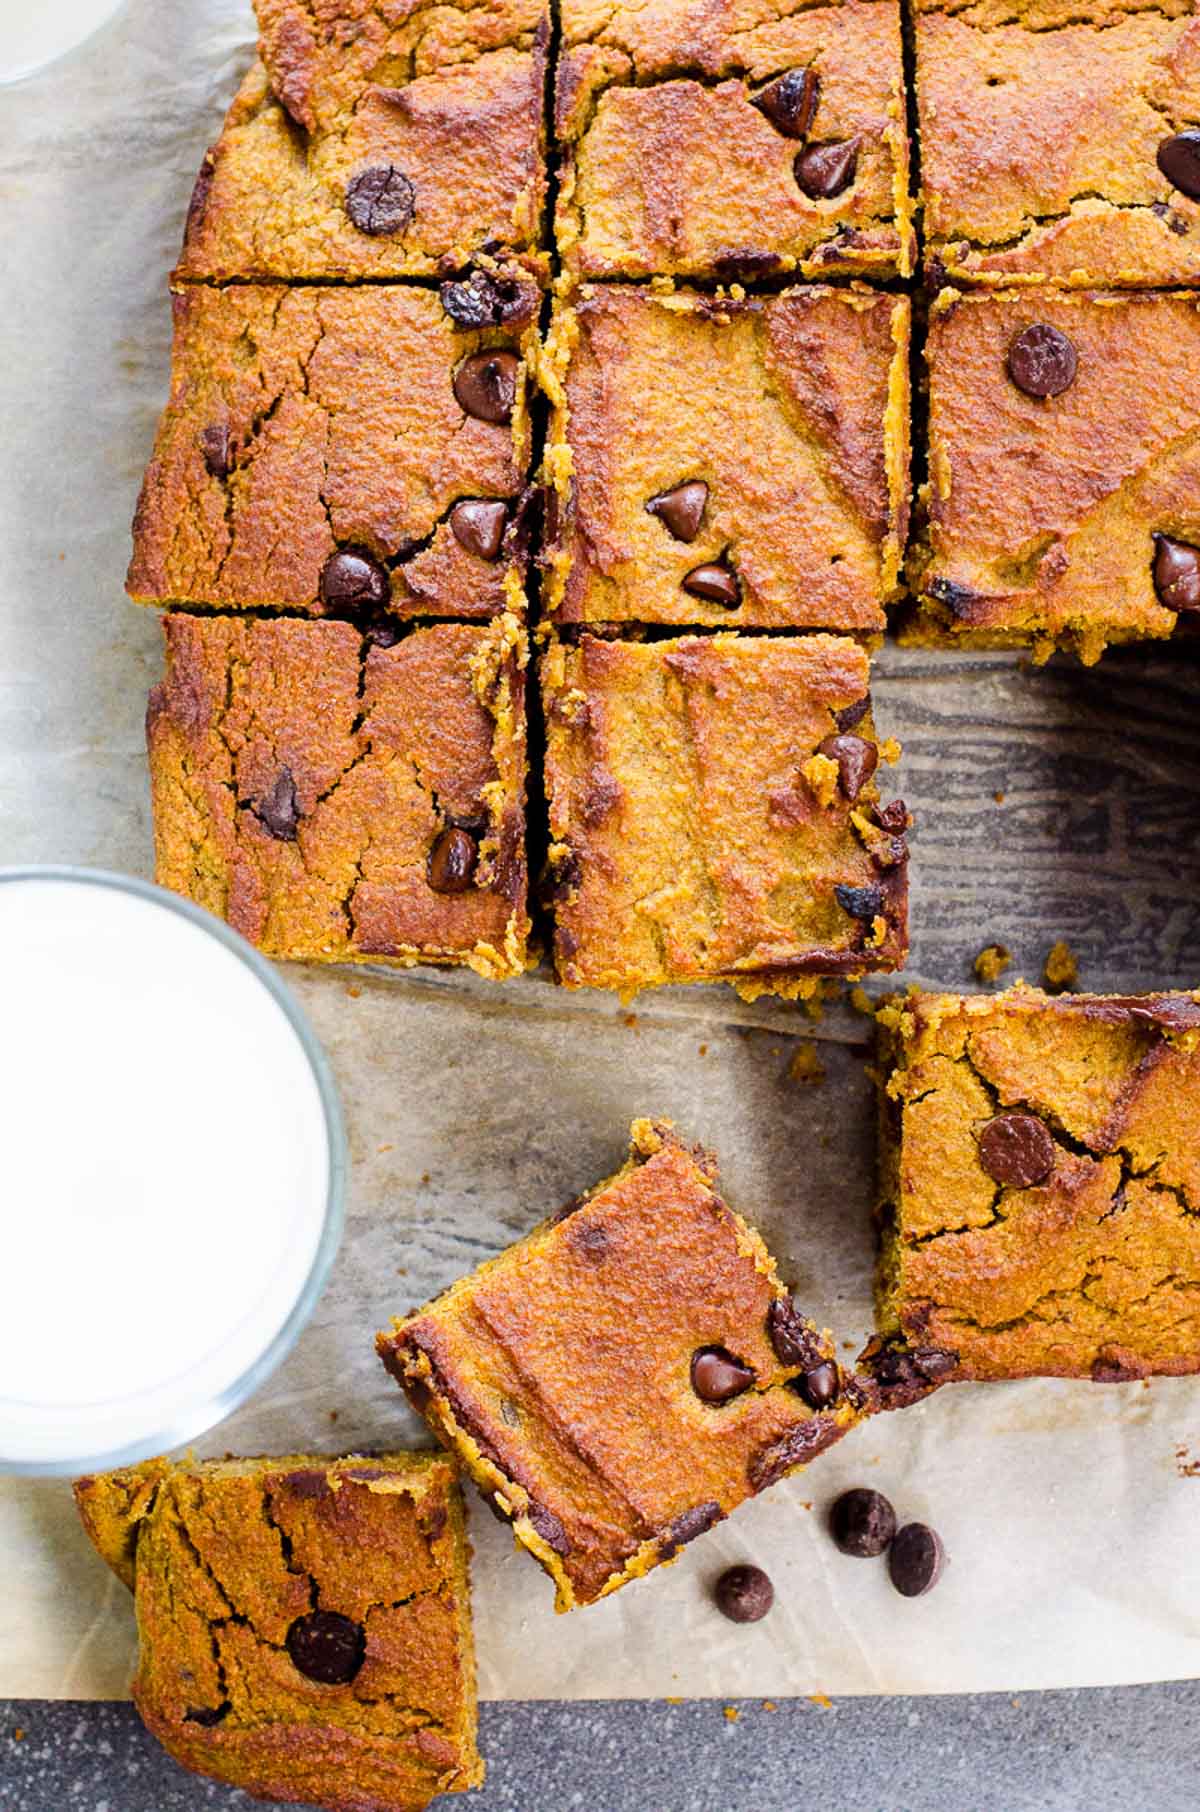 Healthy pumpkin bars cut into squares on parchment paper with a glass of milk.